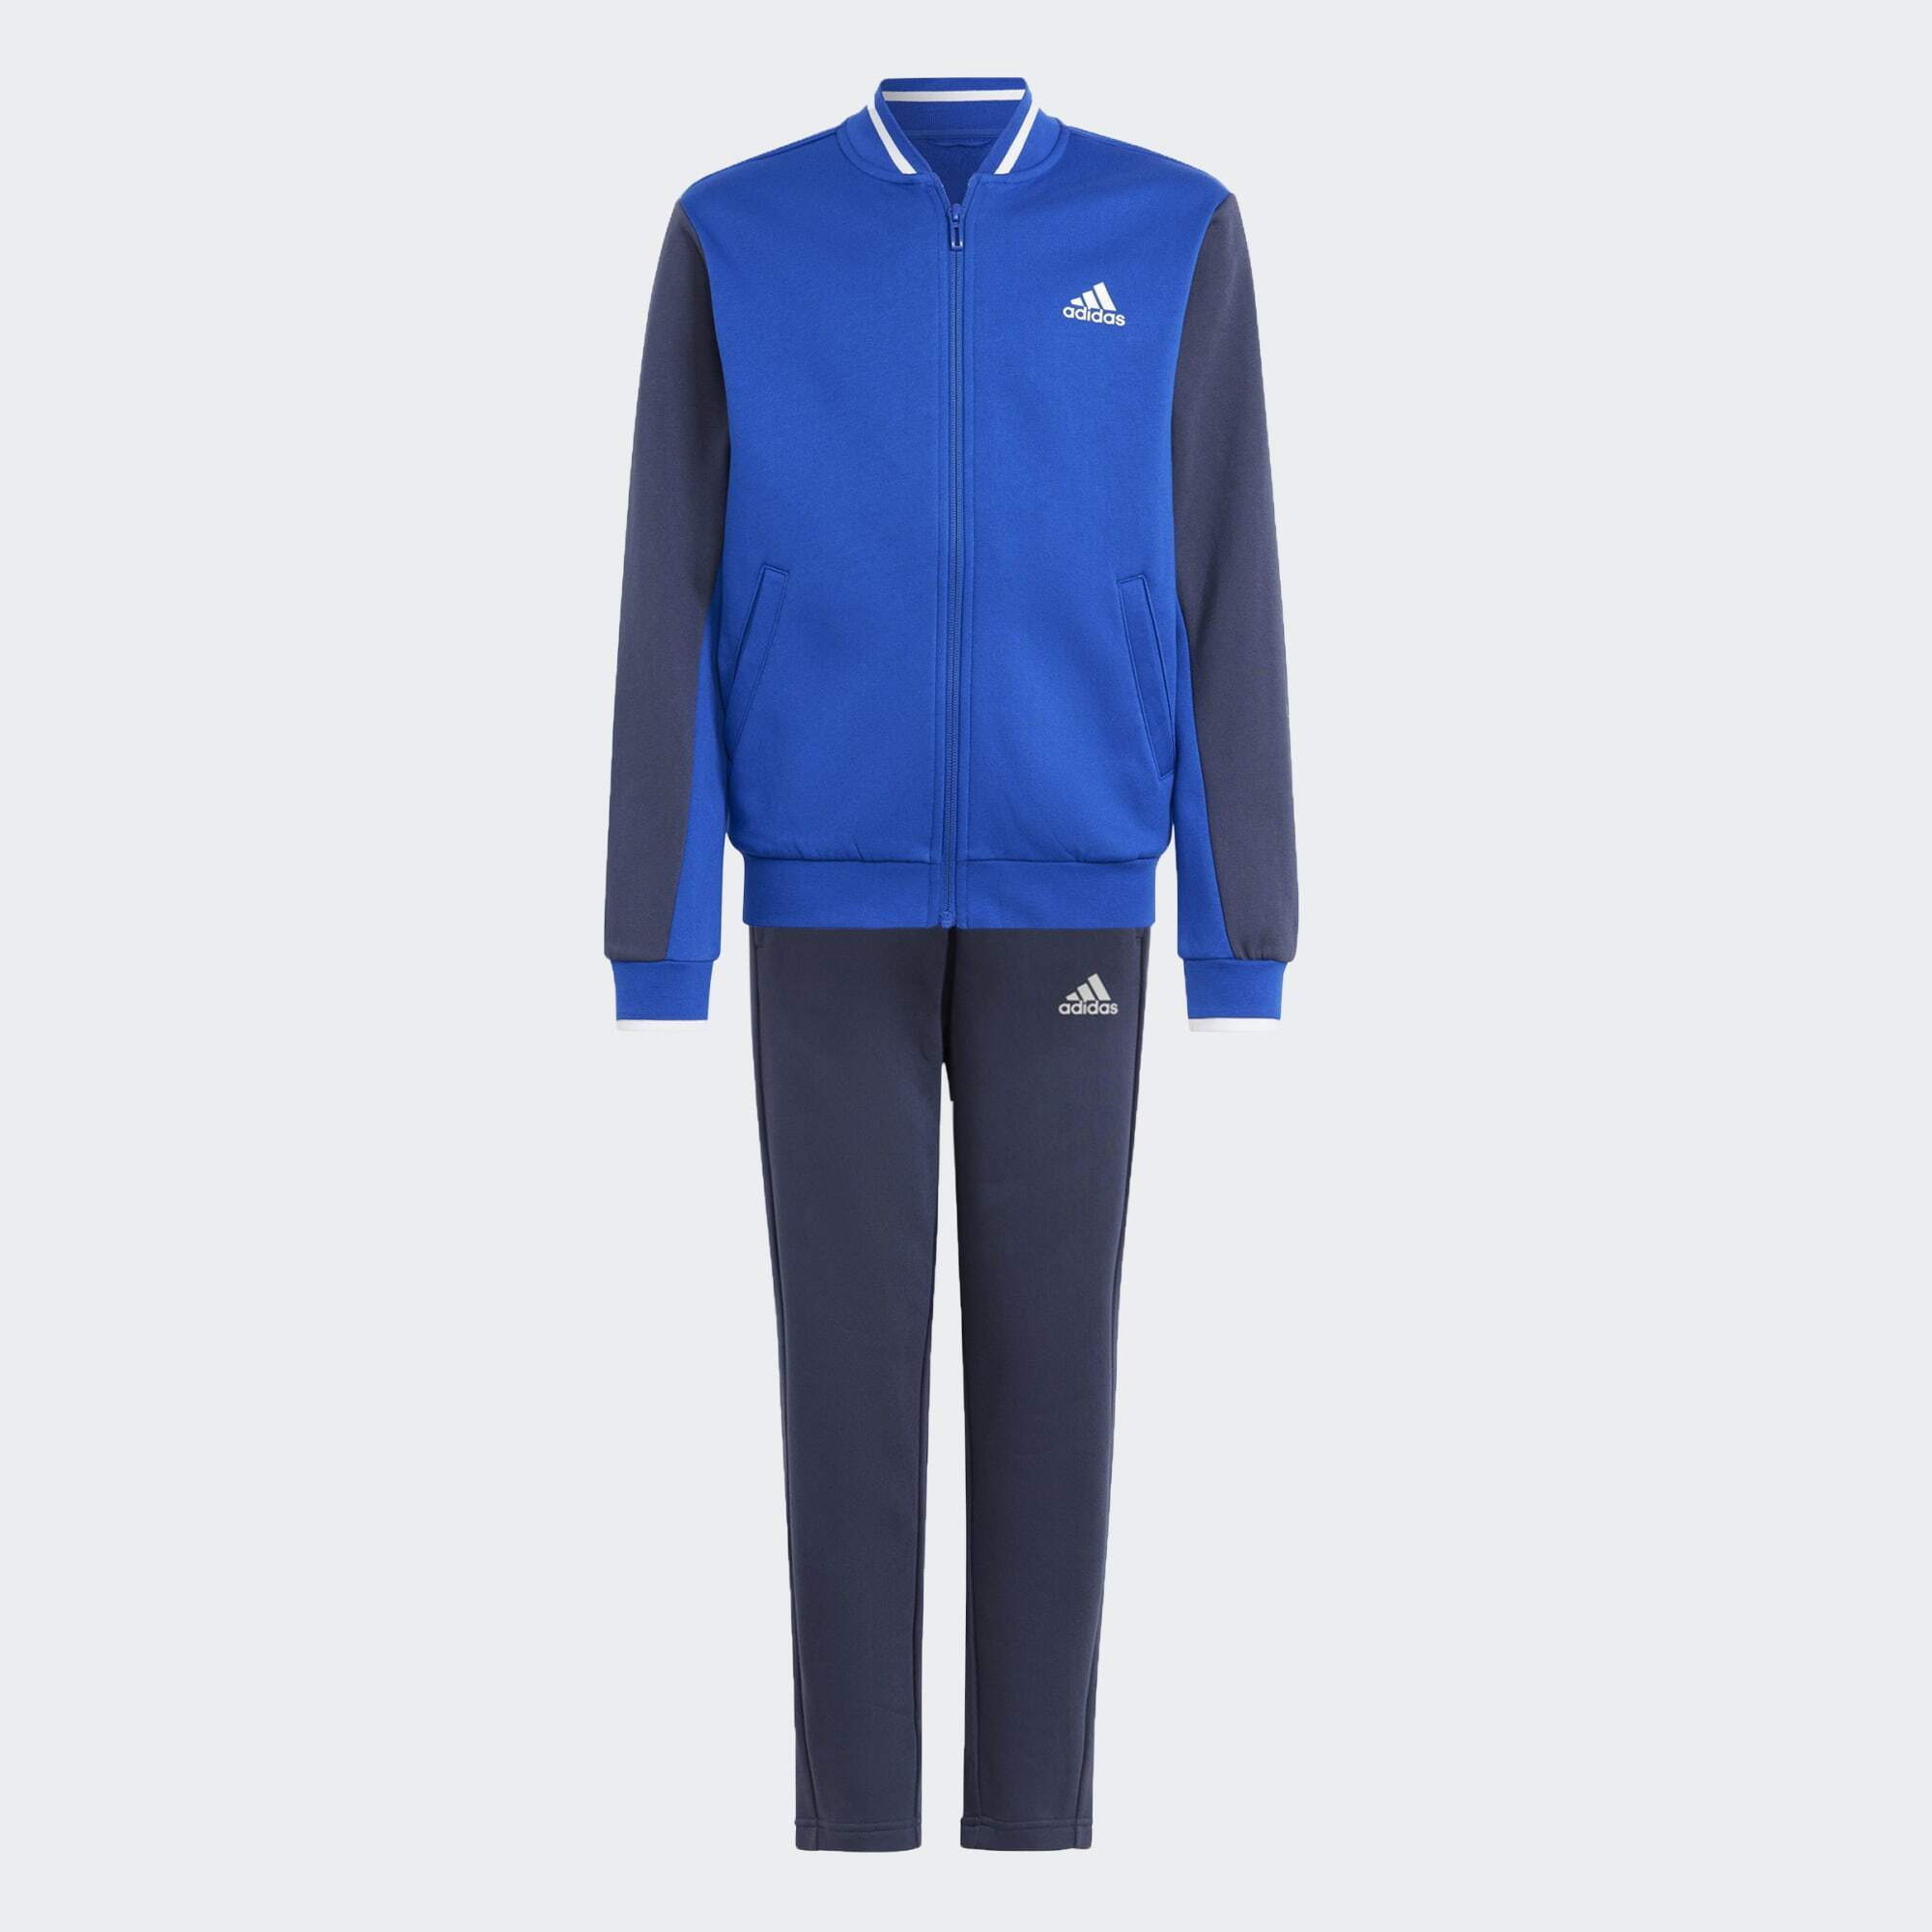 adidas Together Back to School AEROREADY Track Suit (9000127315_64299)